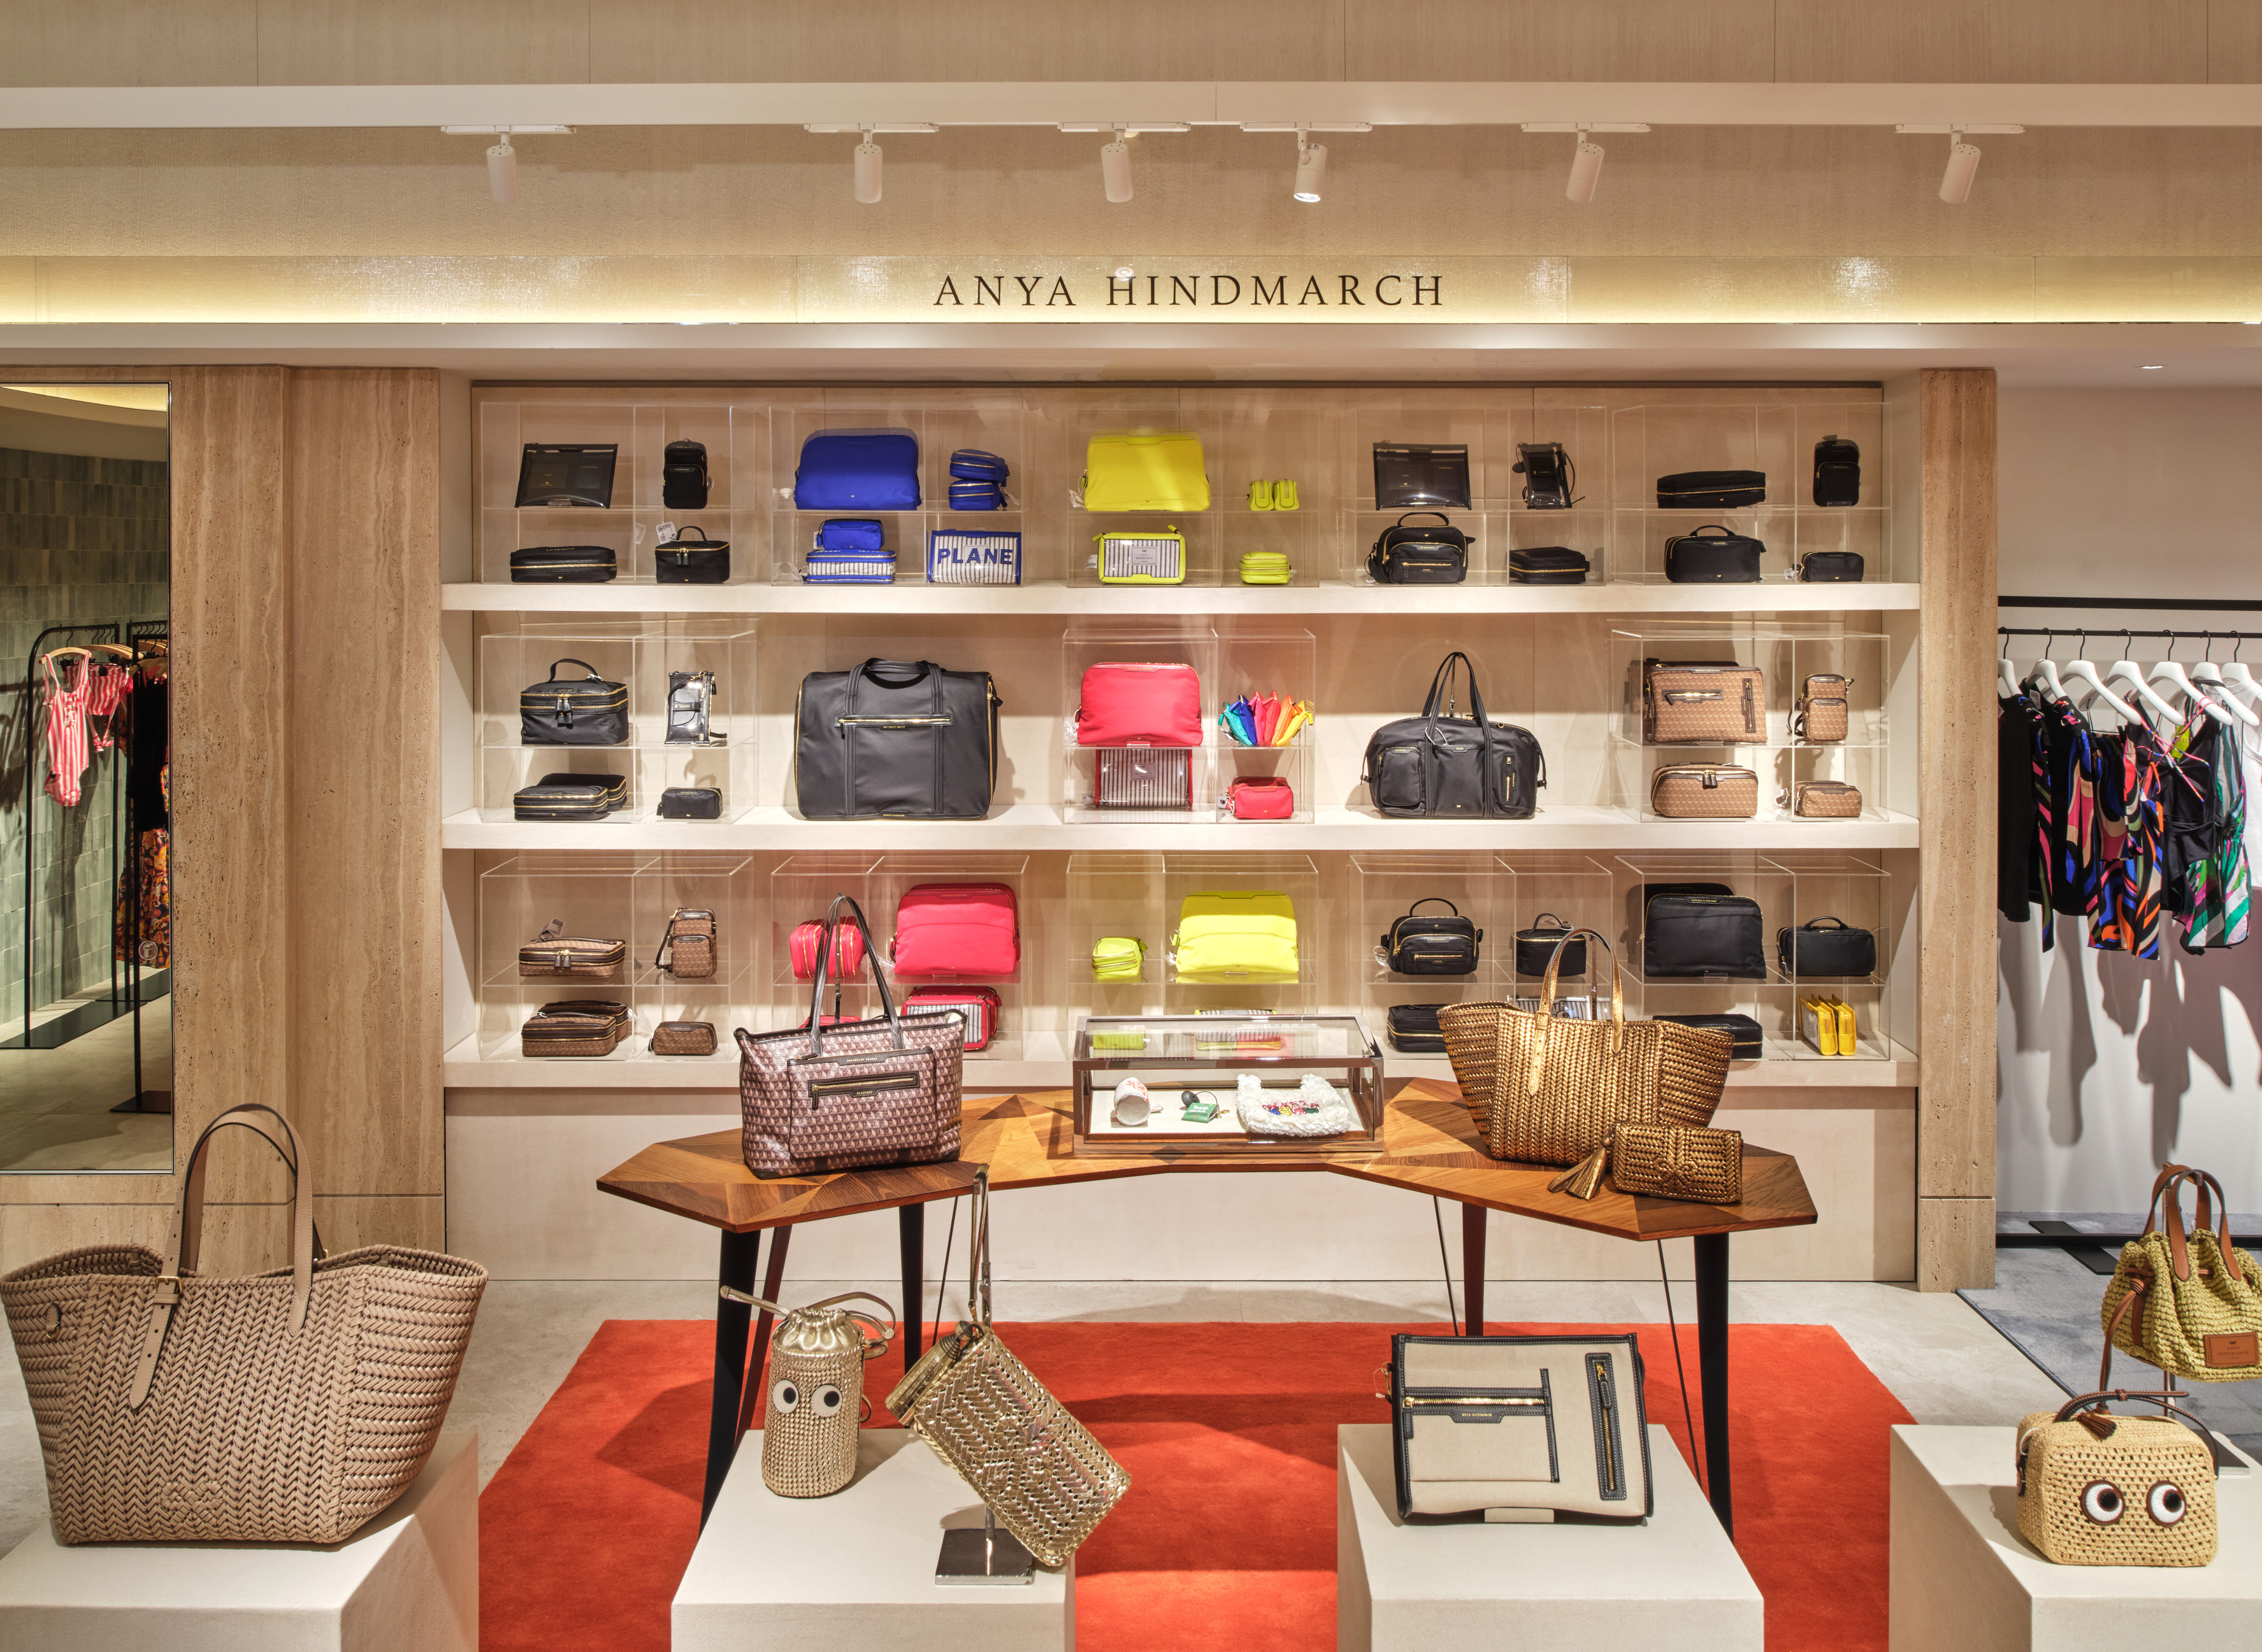 Harrods opens luxe new lingerie and loungewear department